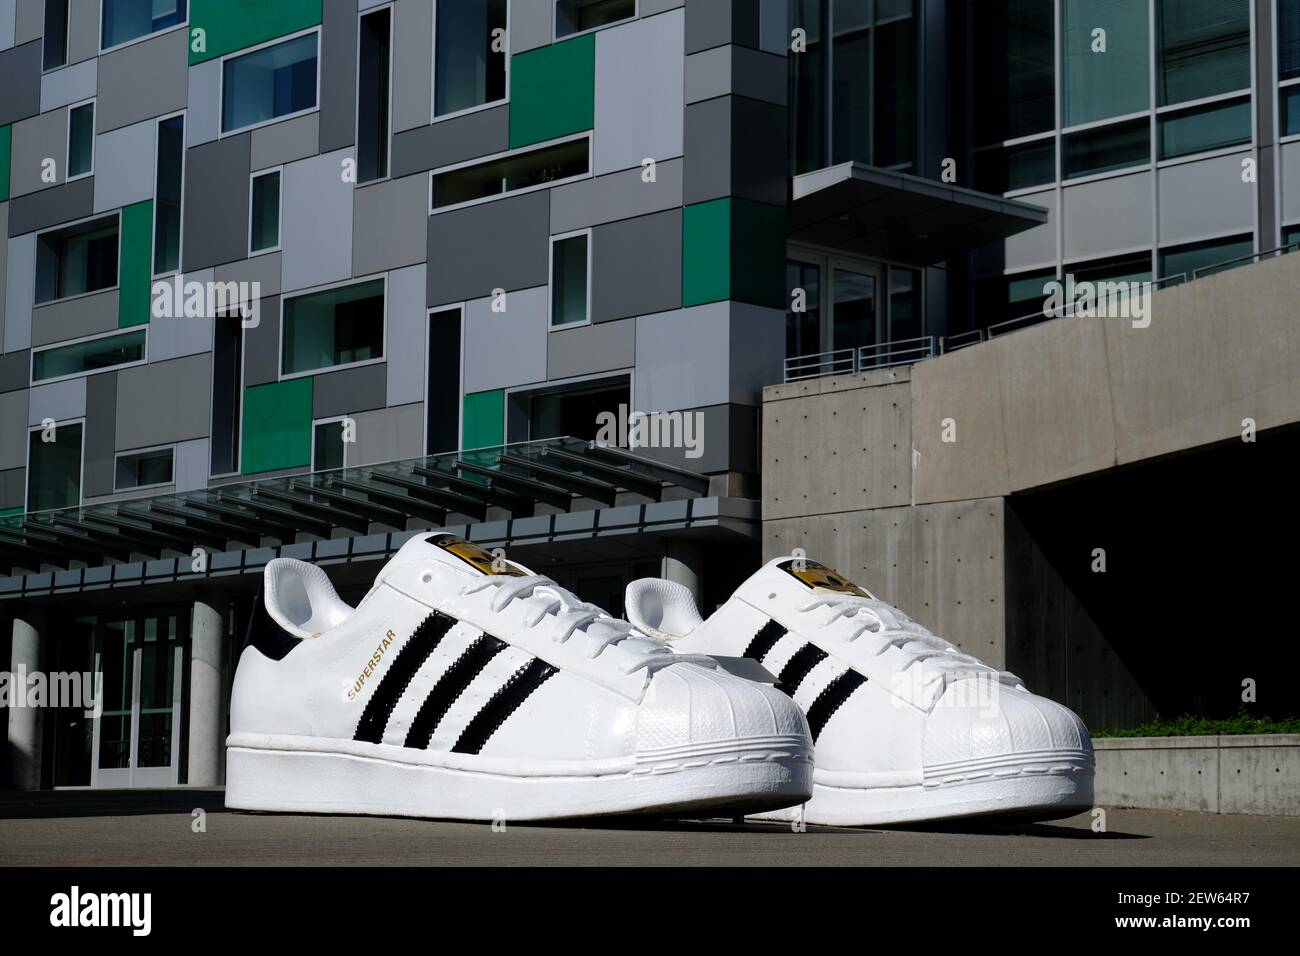 Superstar shoes are pictured at the Adidas North American headquarters in  Portland, Ore., on September 26, 2017. Adidas executive Jim Gatto, who  worked out of the Portland headquarters, was charged by the